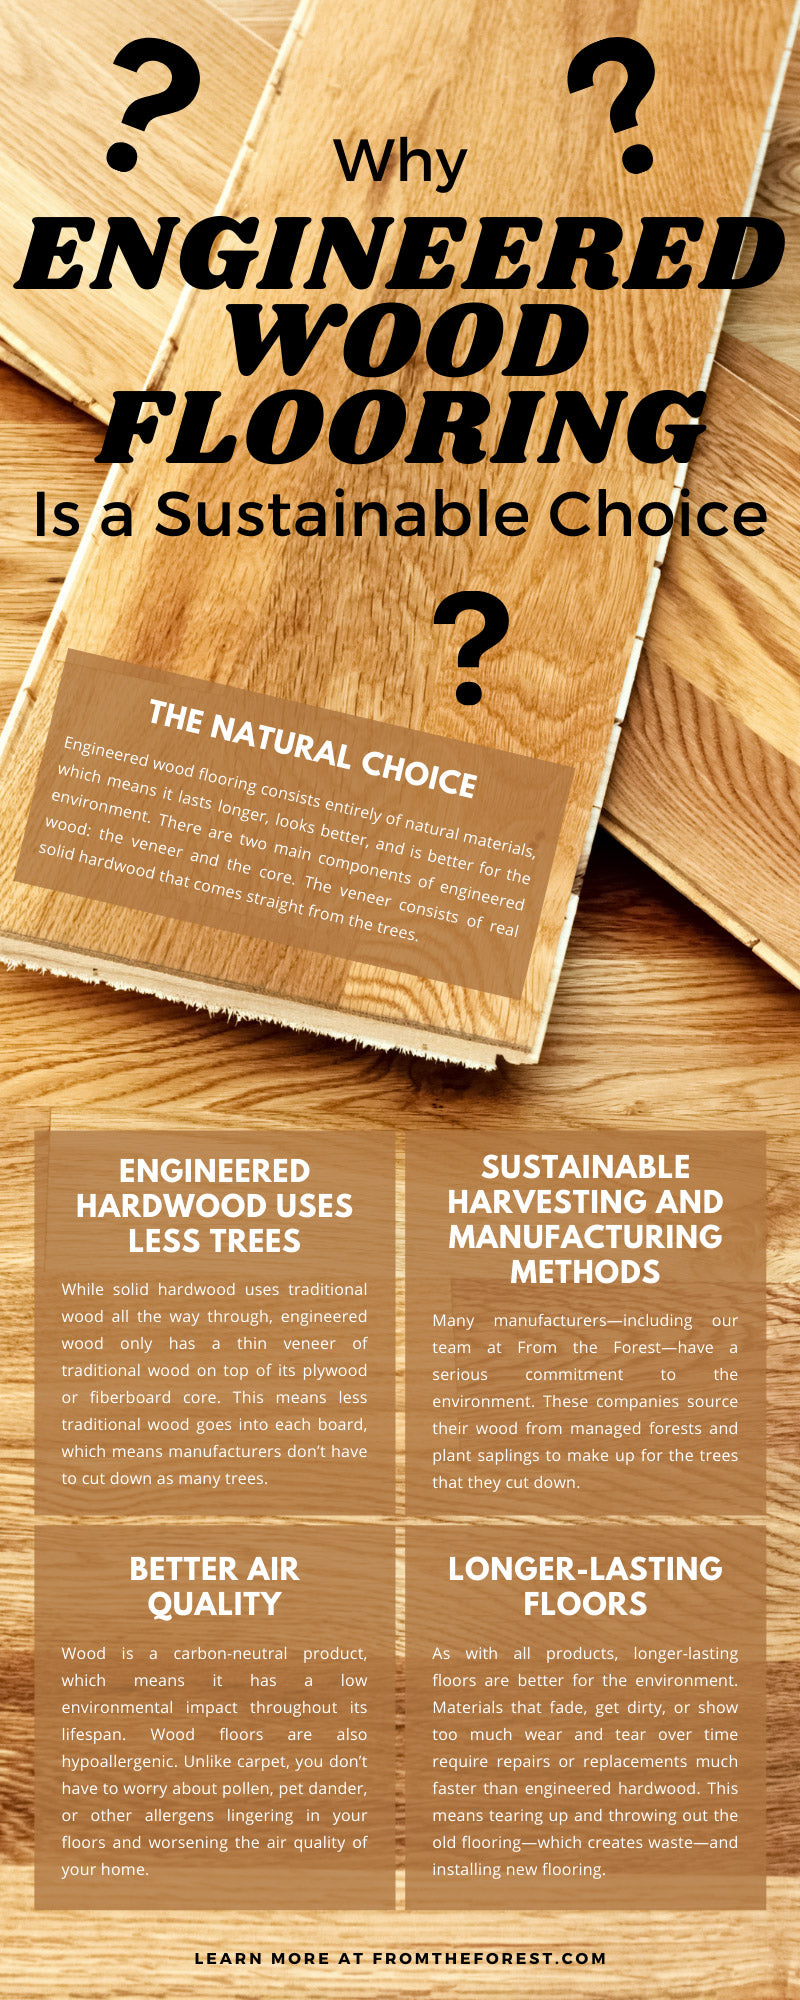 Why Engineered Wood Flooring Is a Sustainable Choice